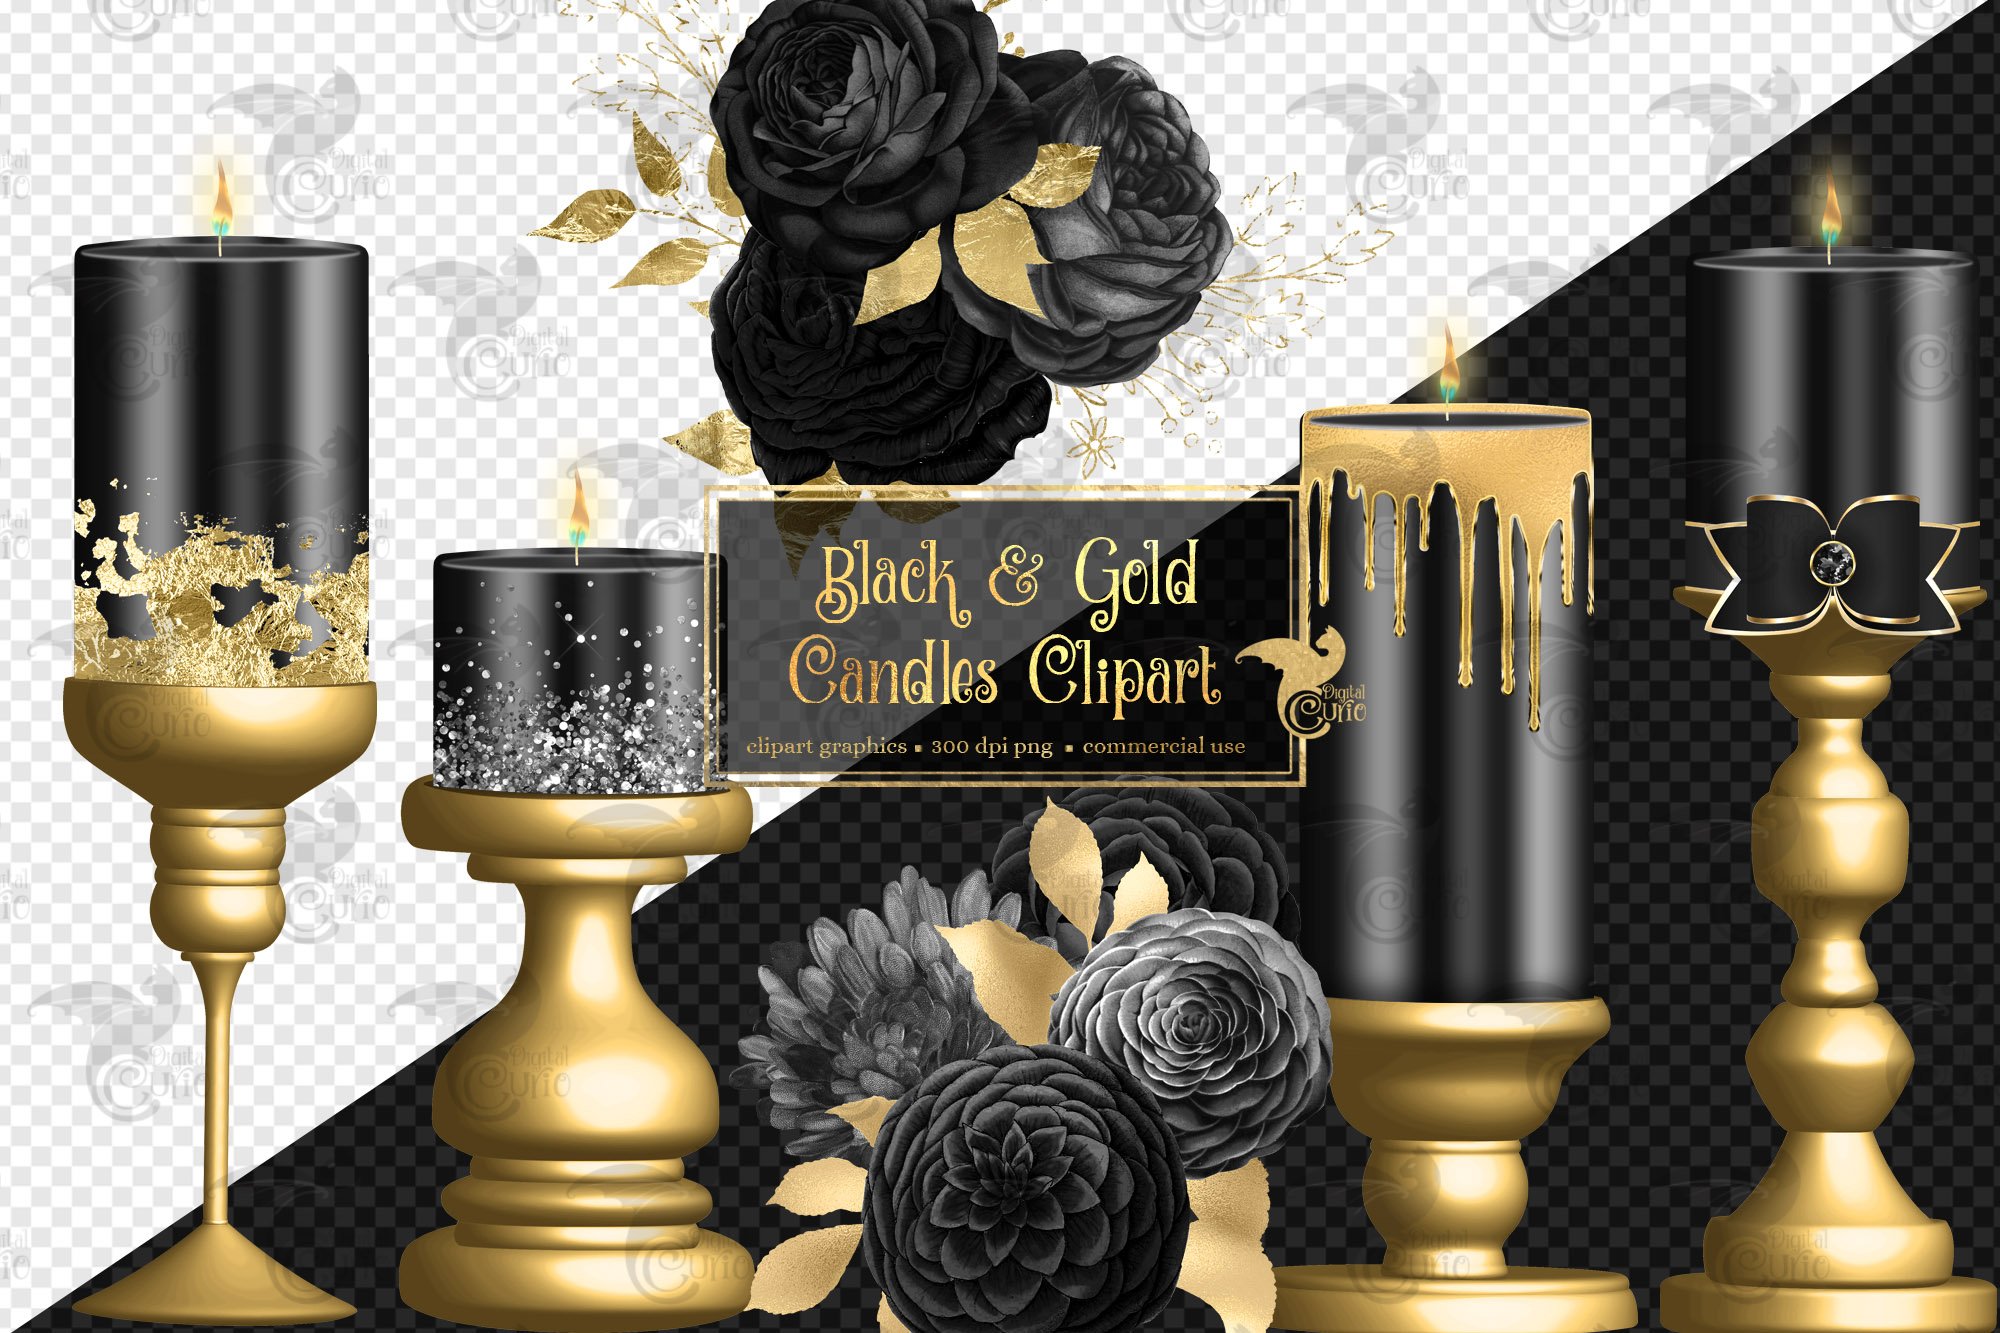 Black and Gold Candle Clipart preview image.